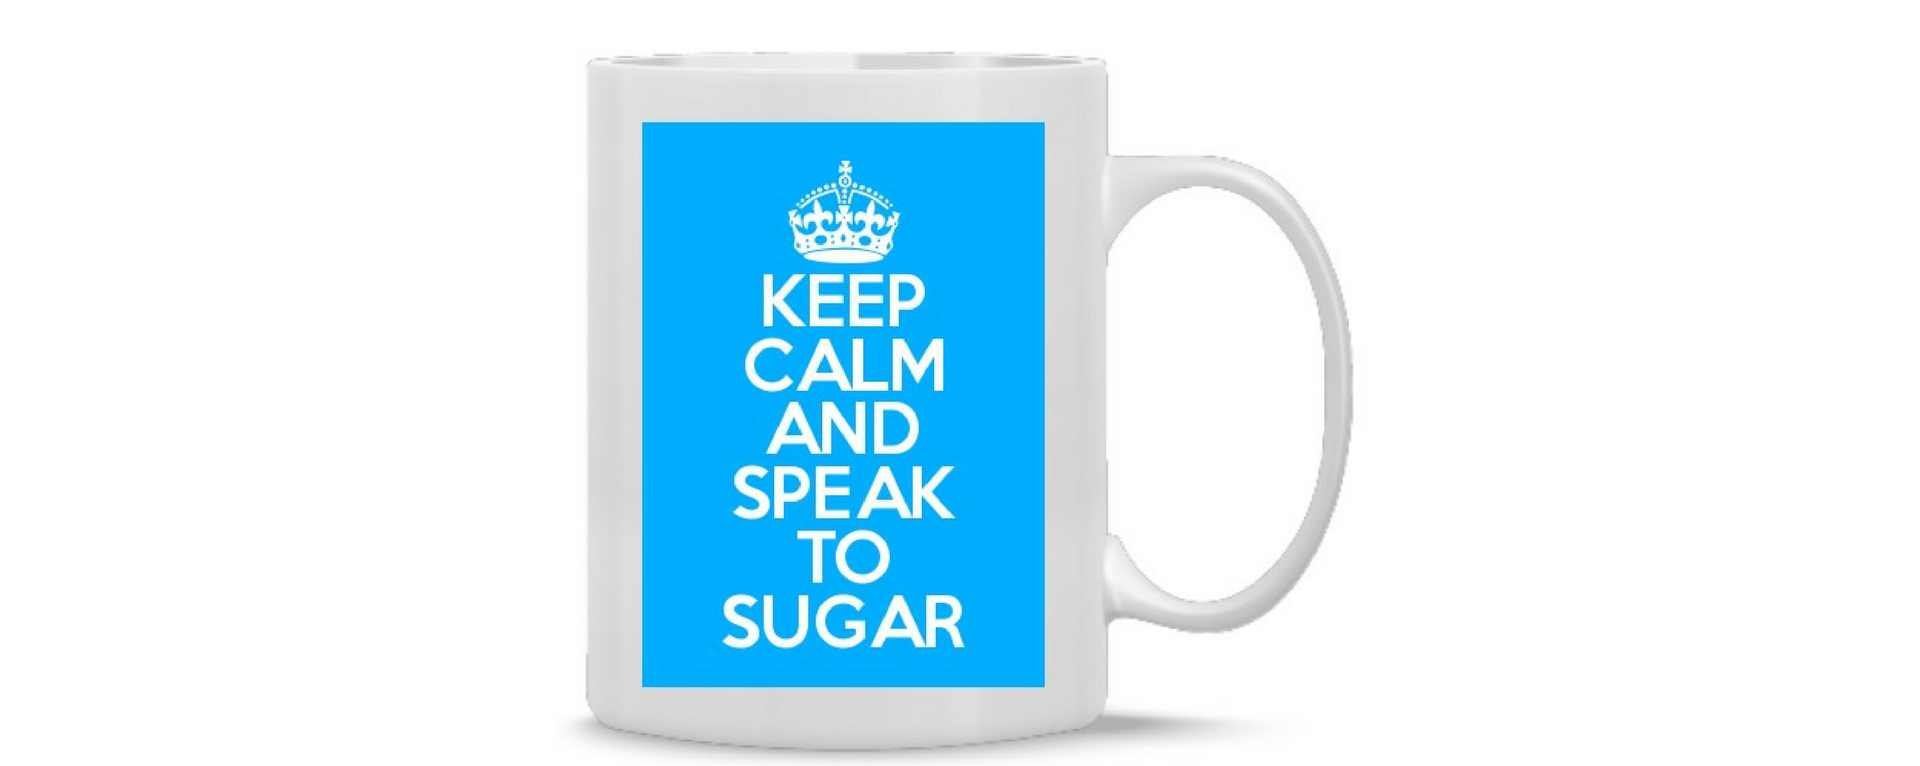 Keep calm and speak to Sugar PR branded mugs for 76 King Street in Manchester